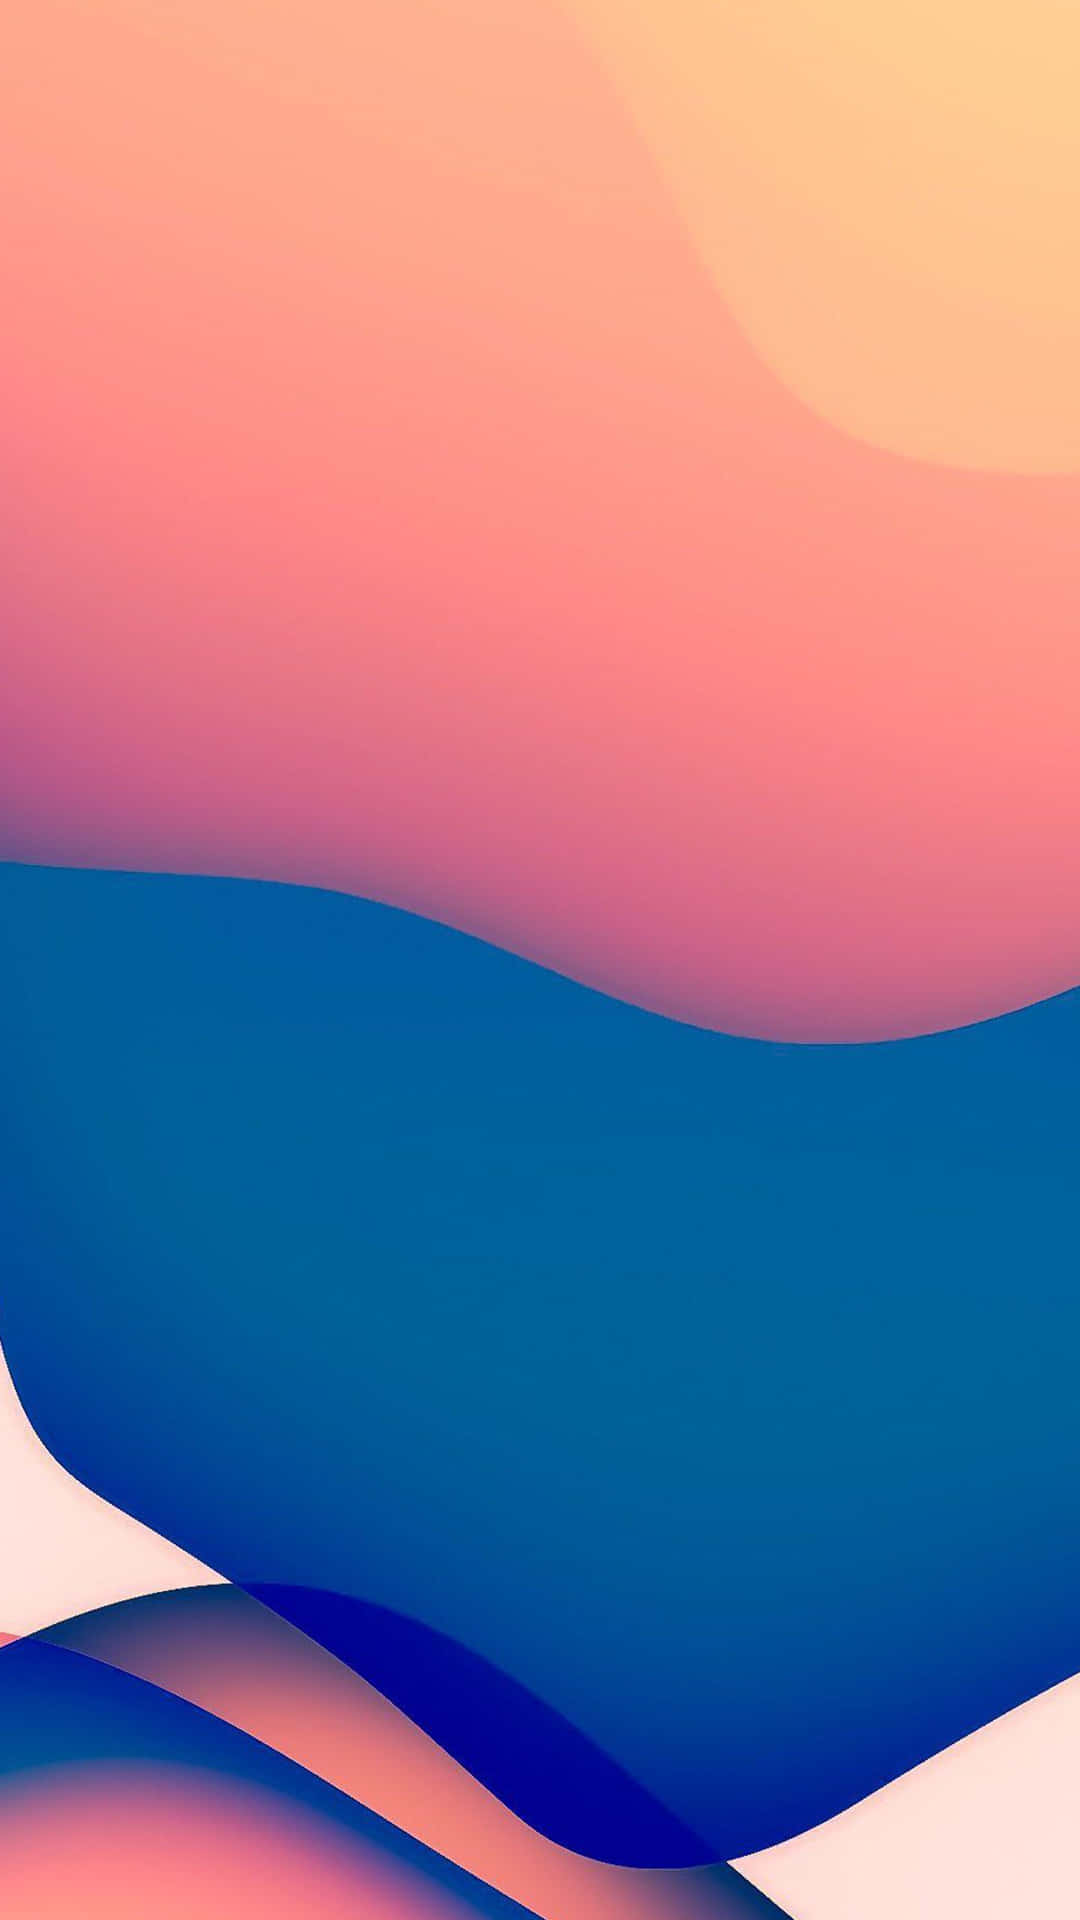 The sleek and sophisticated design of the iPhone 2020 Wallpaper